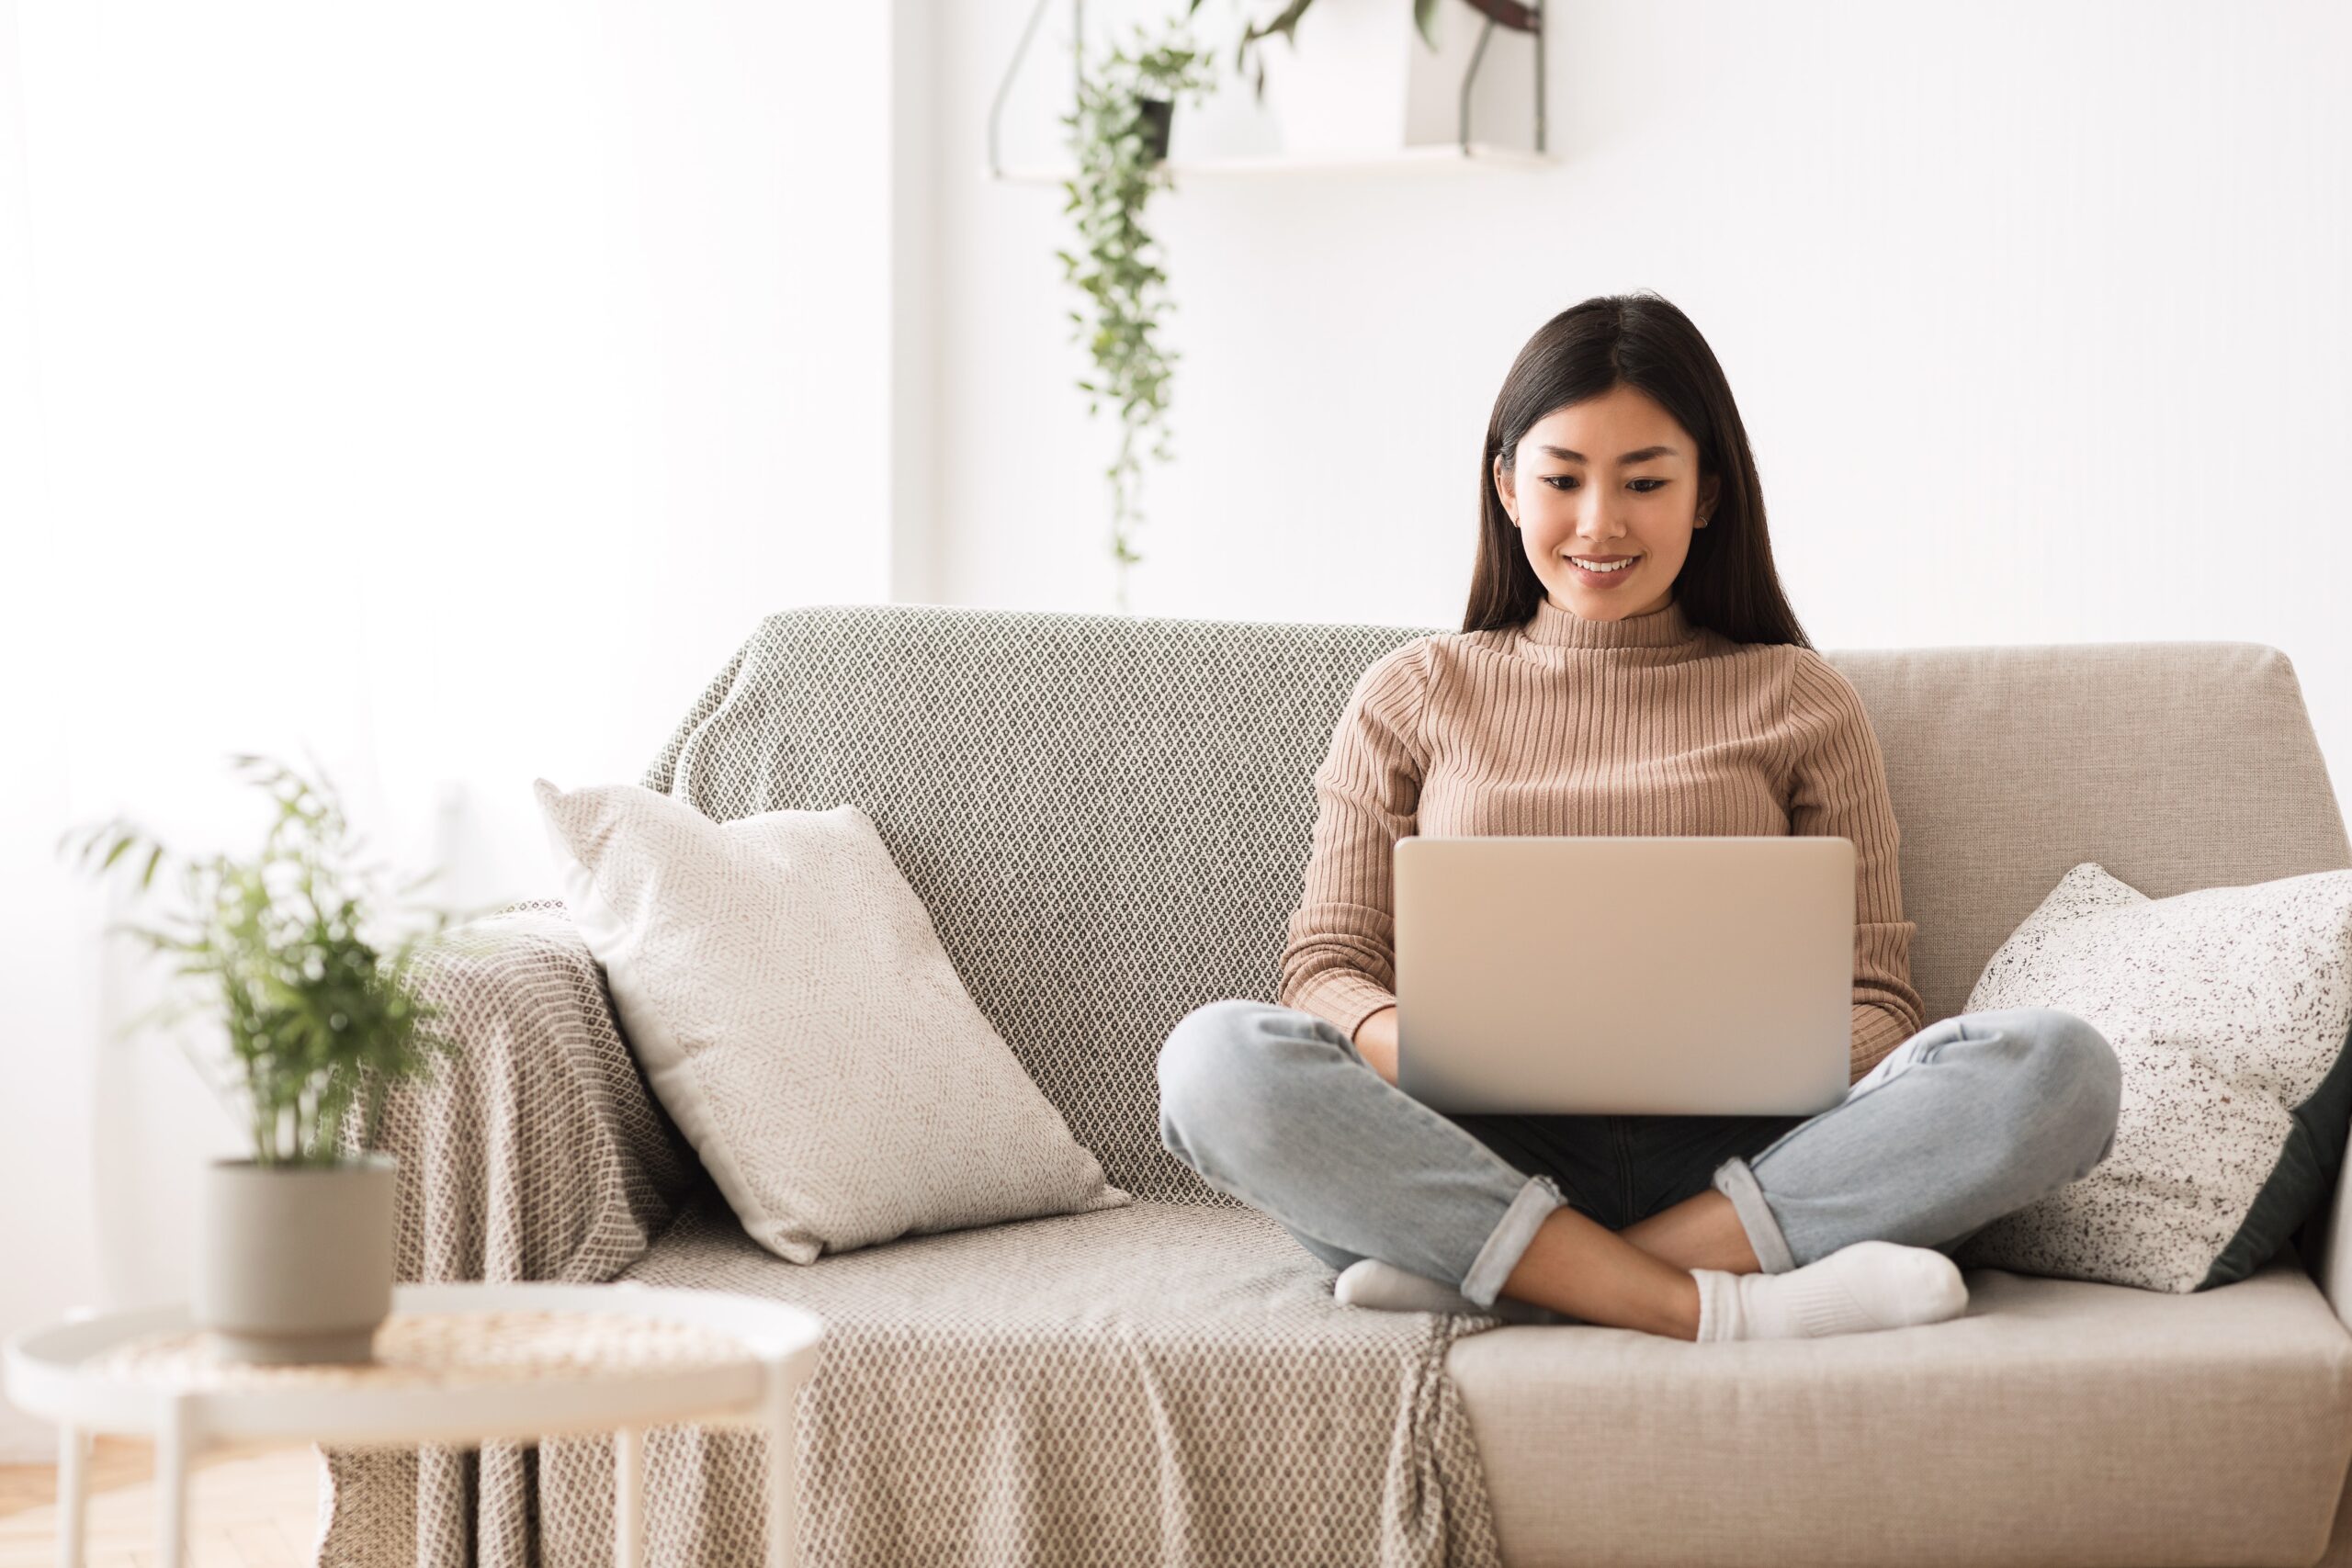 Woman on Couch Looking at Laptop